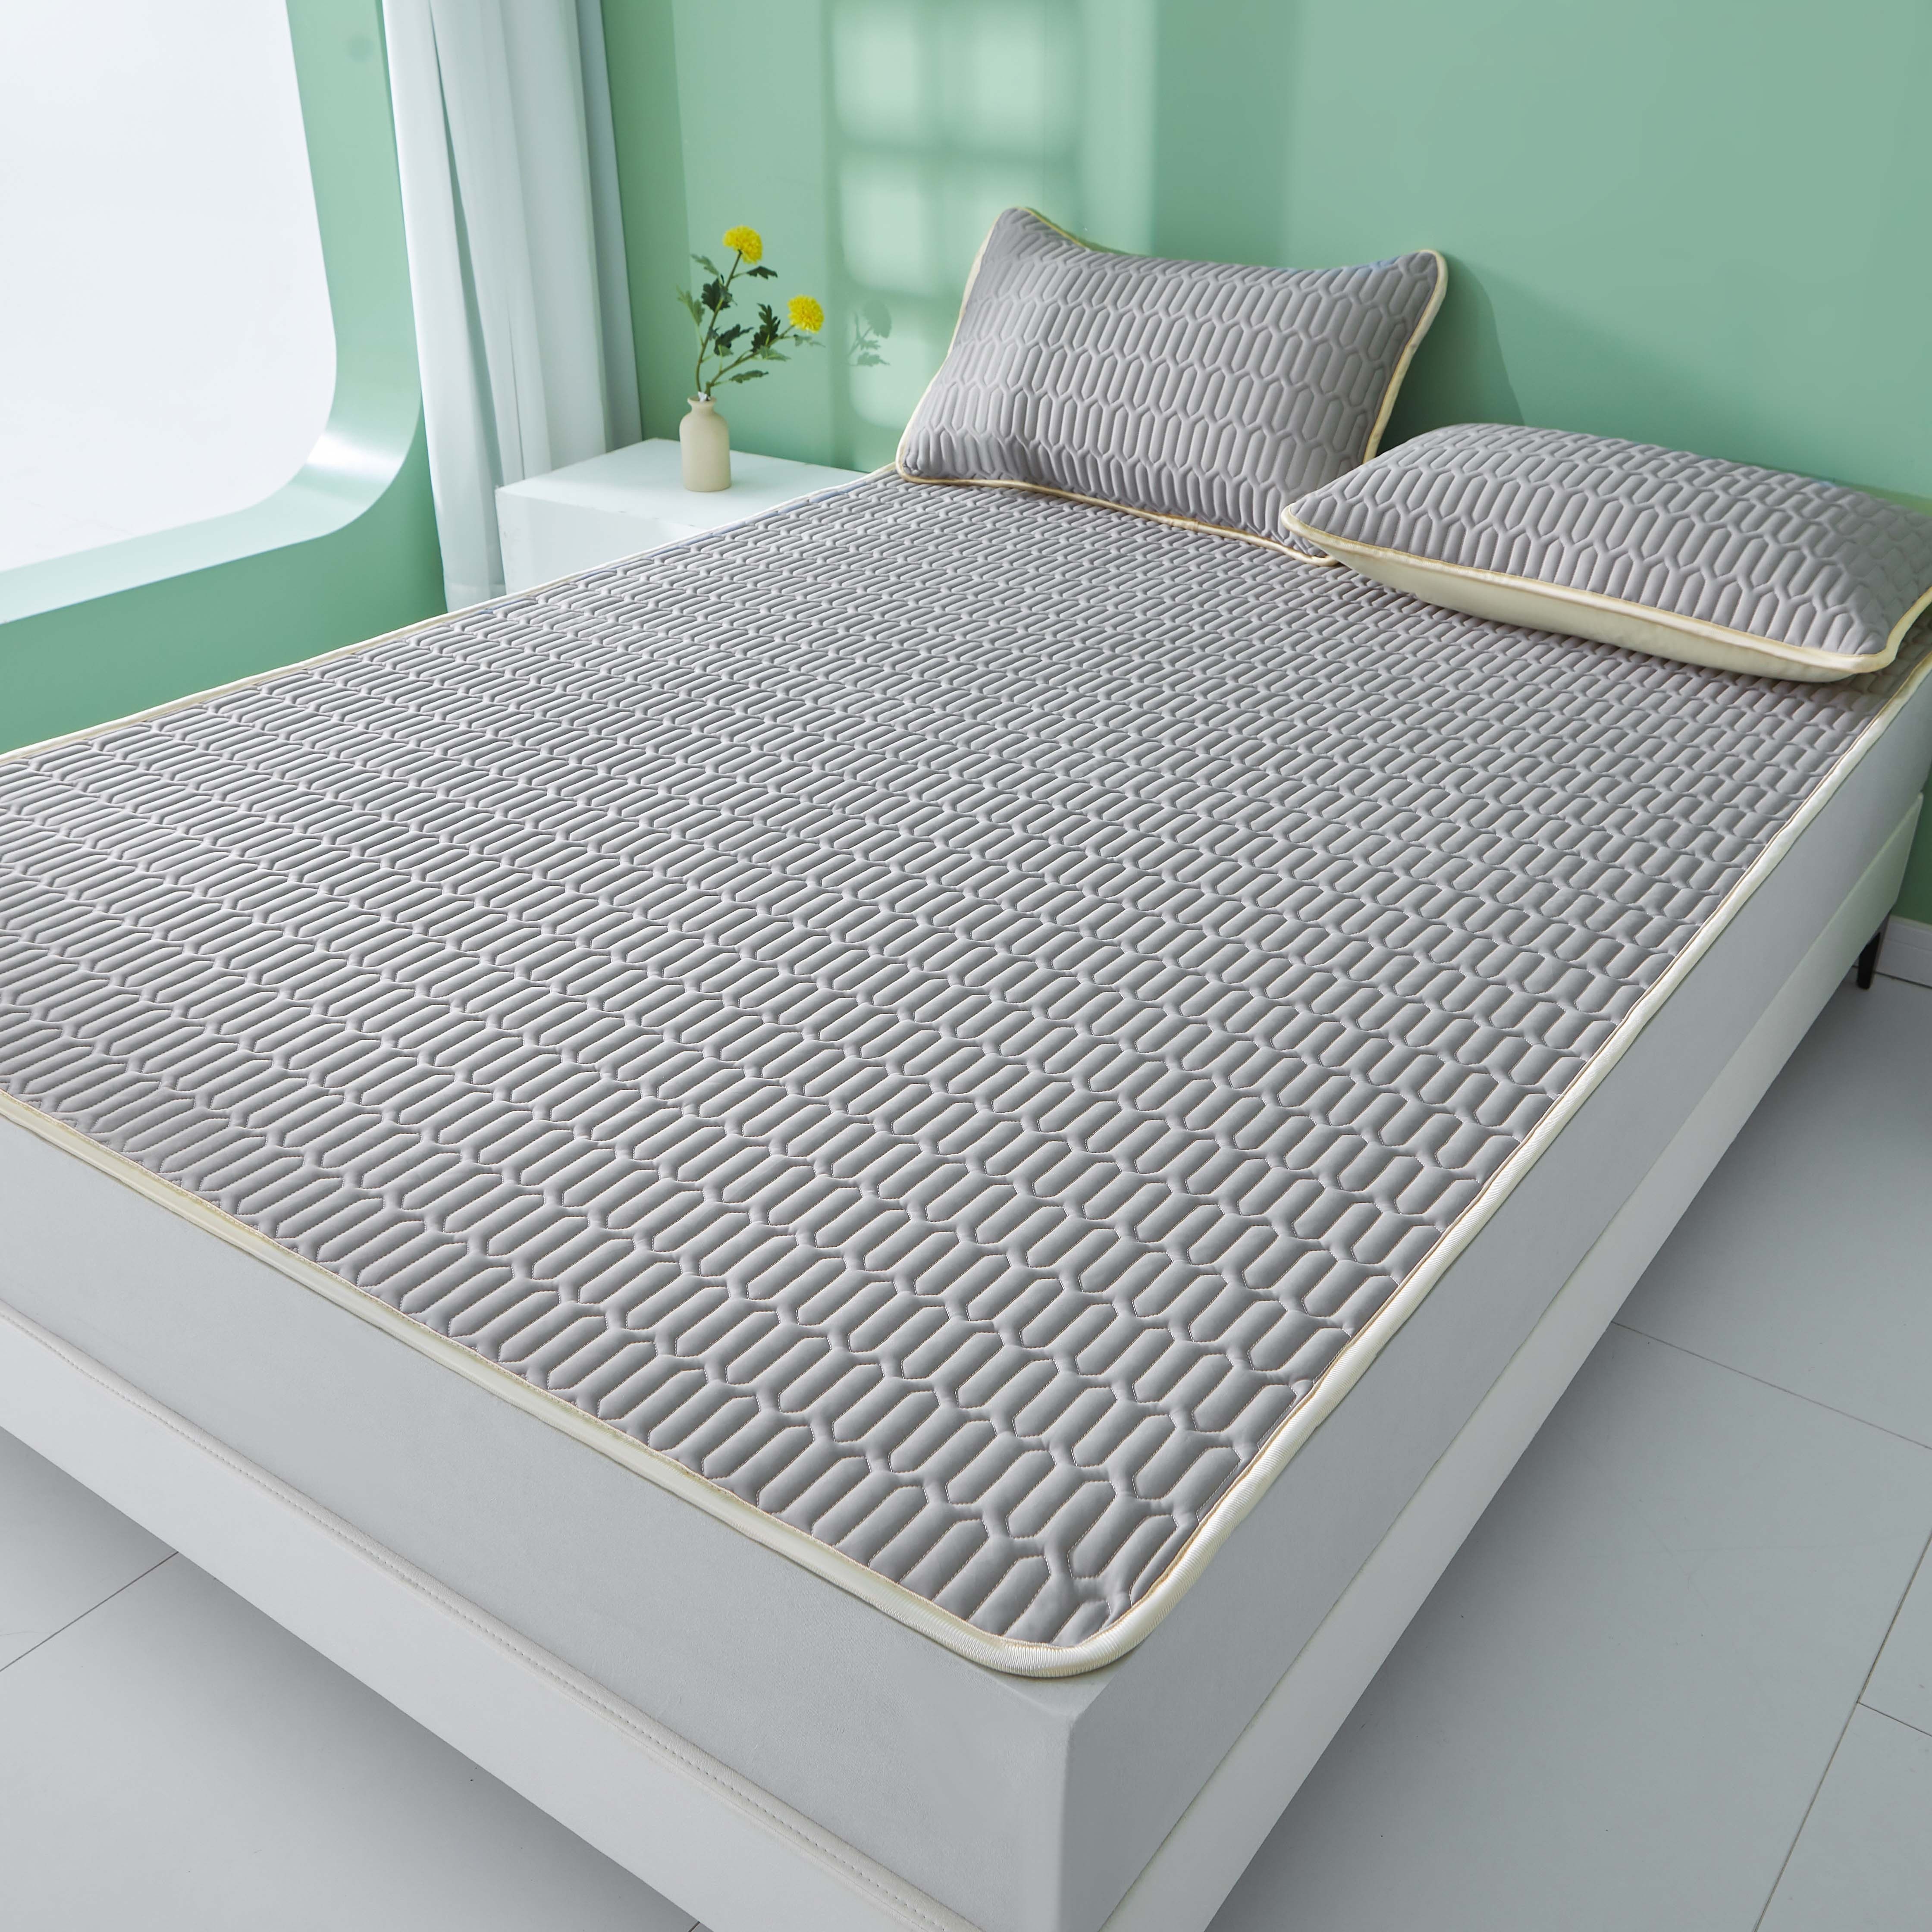 

Cooling Latex Mat - 1pc, Solid Color, Skin-friendly & Breathable, Machine Washable For Summer Comfort, Perfect For Bedroom Or Dorm